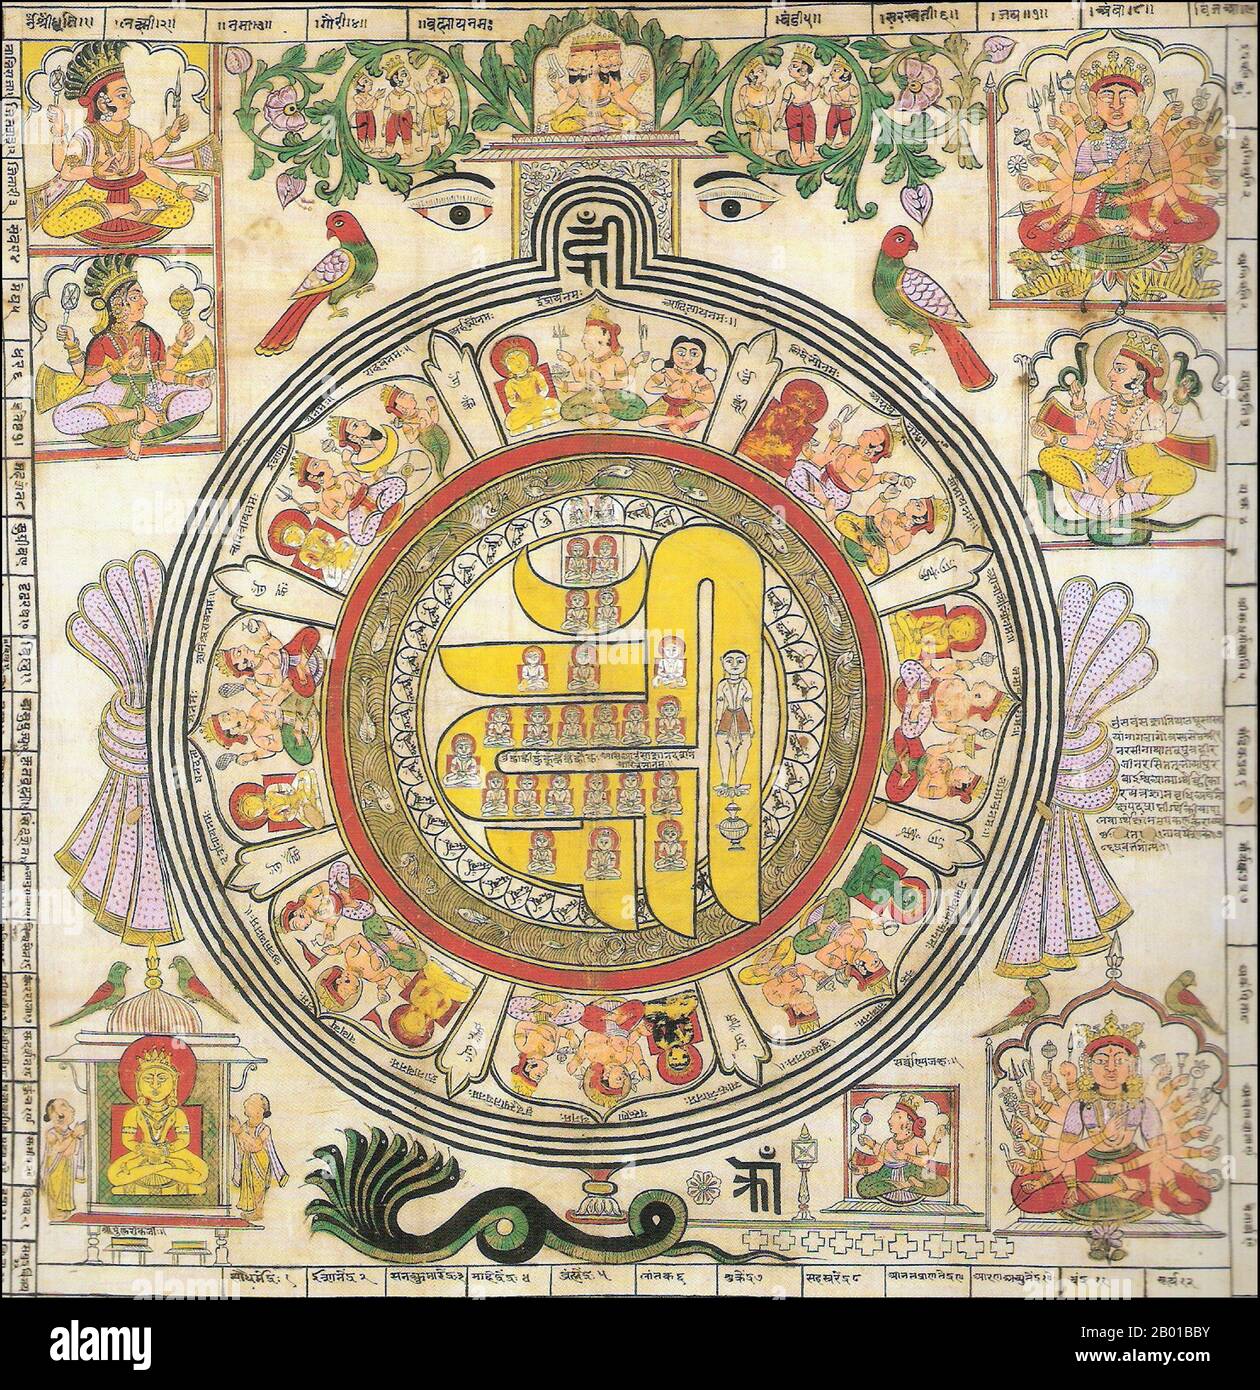 India: Painted diagram of the Om Hrim Siddhi Chakra used by Jains in dravya puja, 18th century.  Jainism is an Indian religion that prescribes pacifism and a path of non-violence towards all living beings. Its philosophy and practice emphasise the necessity of self-effort to move the soul towards divine consciousness and liberation. Any soul that has conquered its own inner enemies and achieved the state of supreme being is called Jina (Conqueror or Victor). Jainism is also referred to as Shraman (self-reliant) Dharma or the religion of Nirgantha (who does not have attachments and aversions). Stock Photo